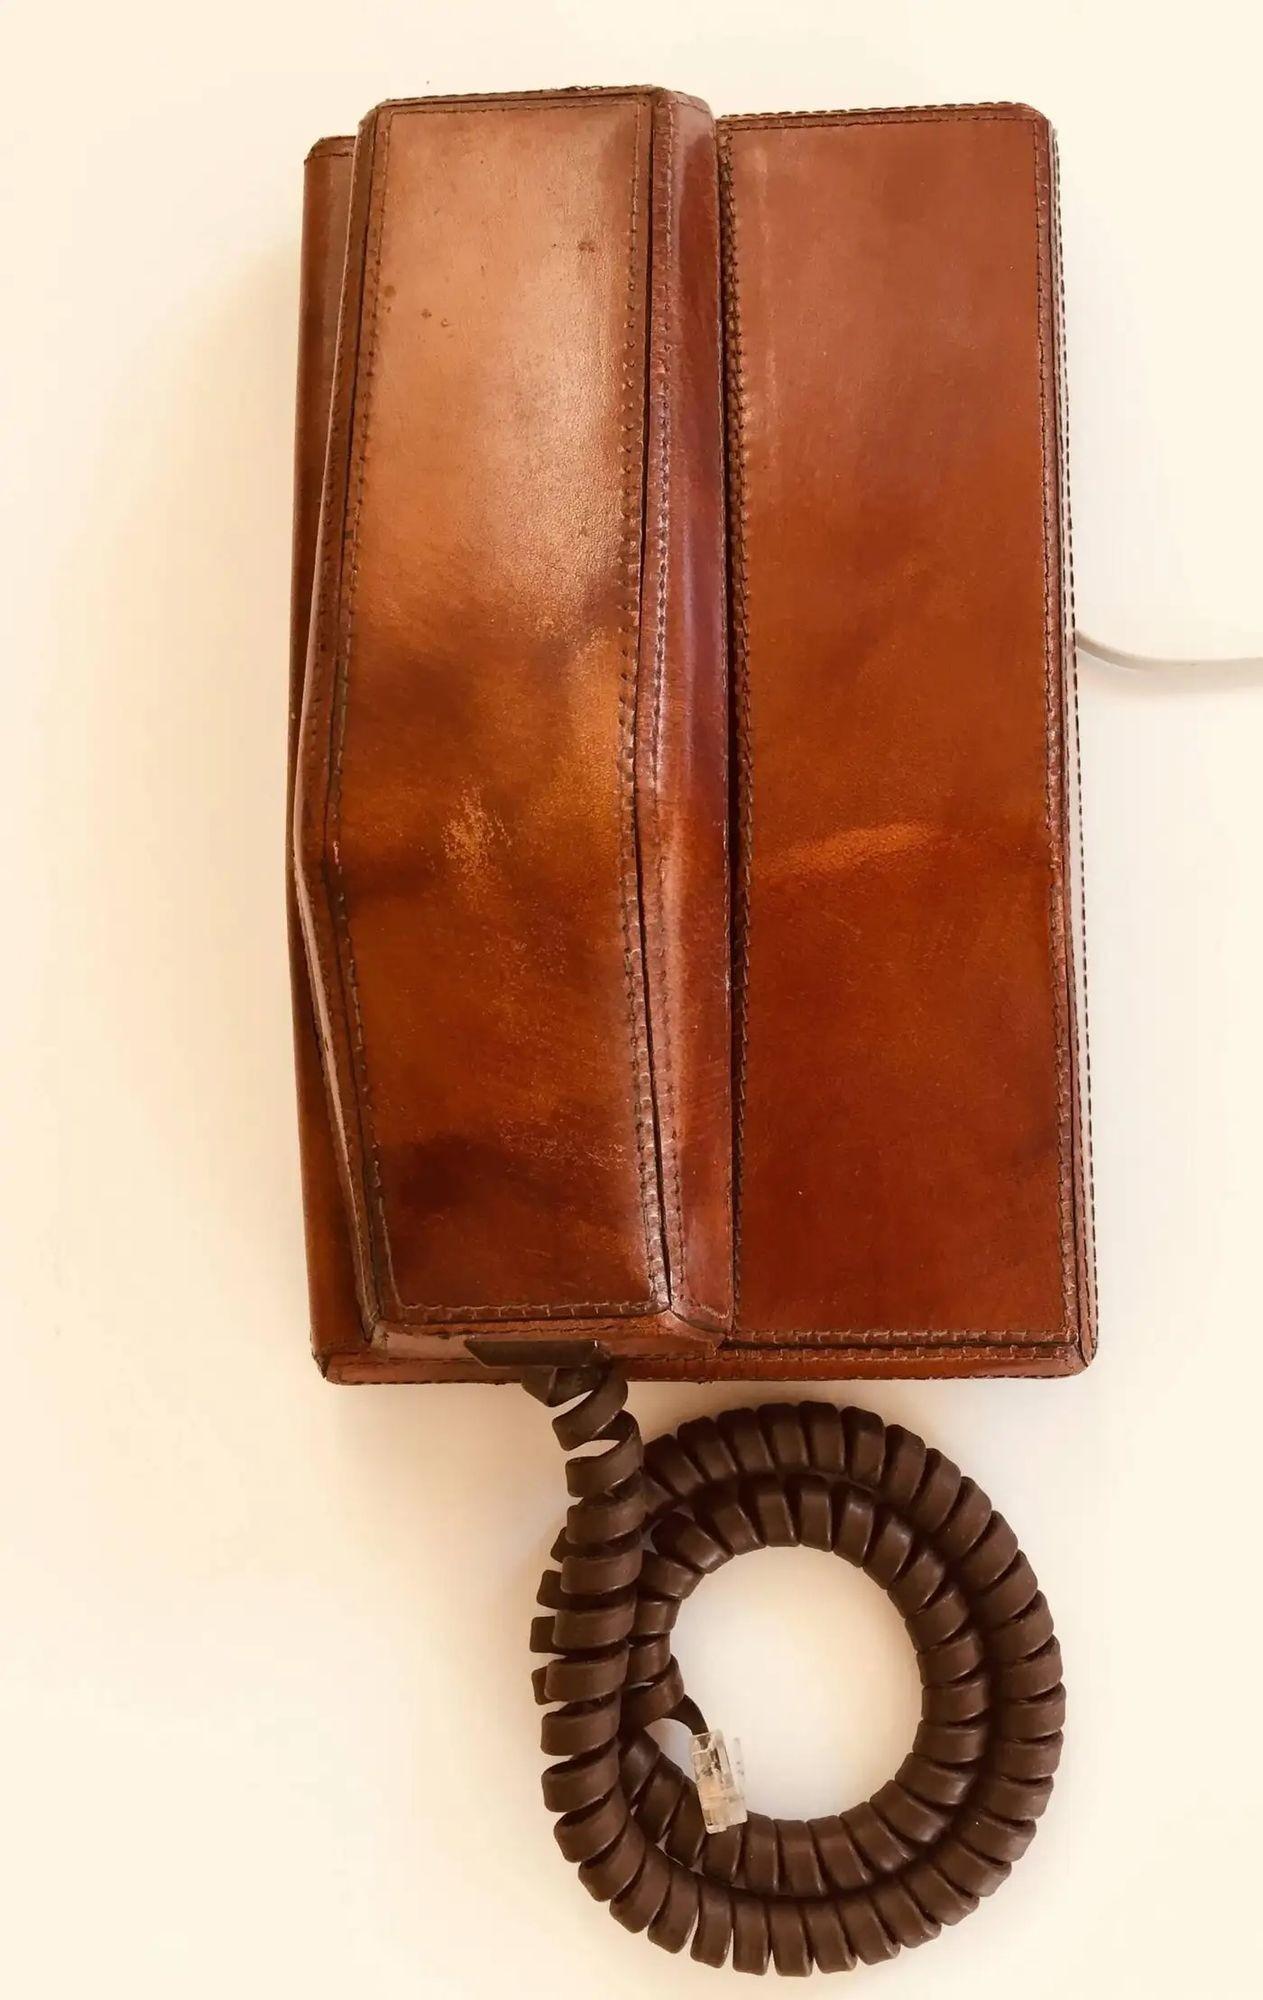 Vintage Brown Leather Covered and Hand-Stitched Telephone by Contempra, 1970s For Sale 6